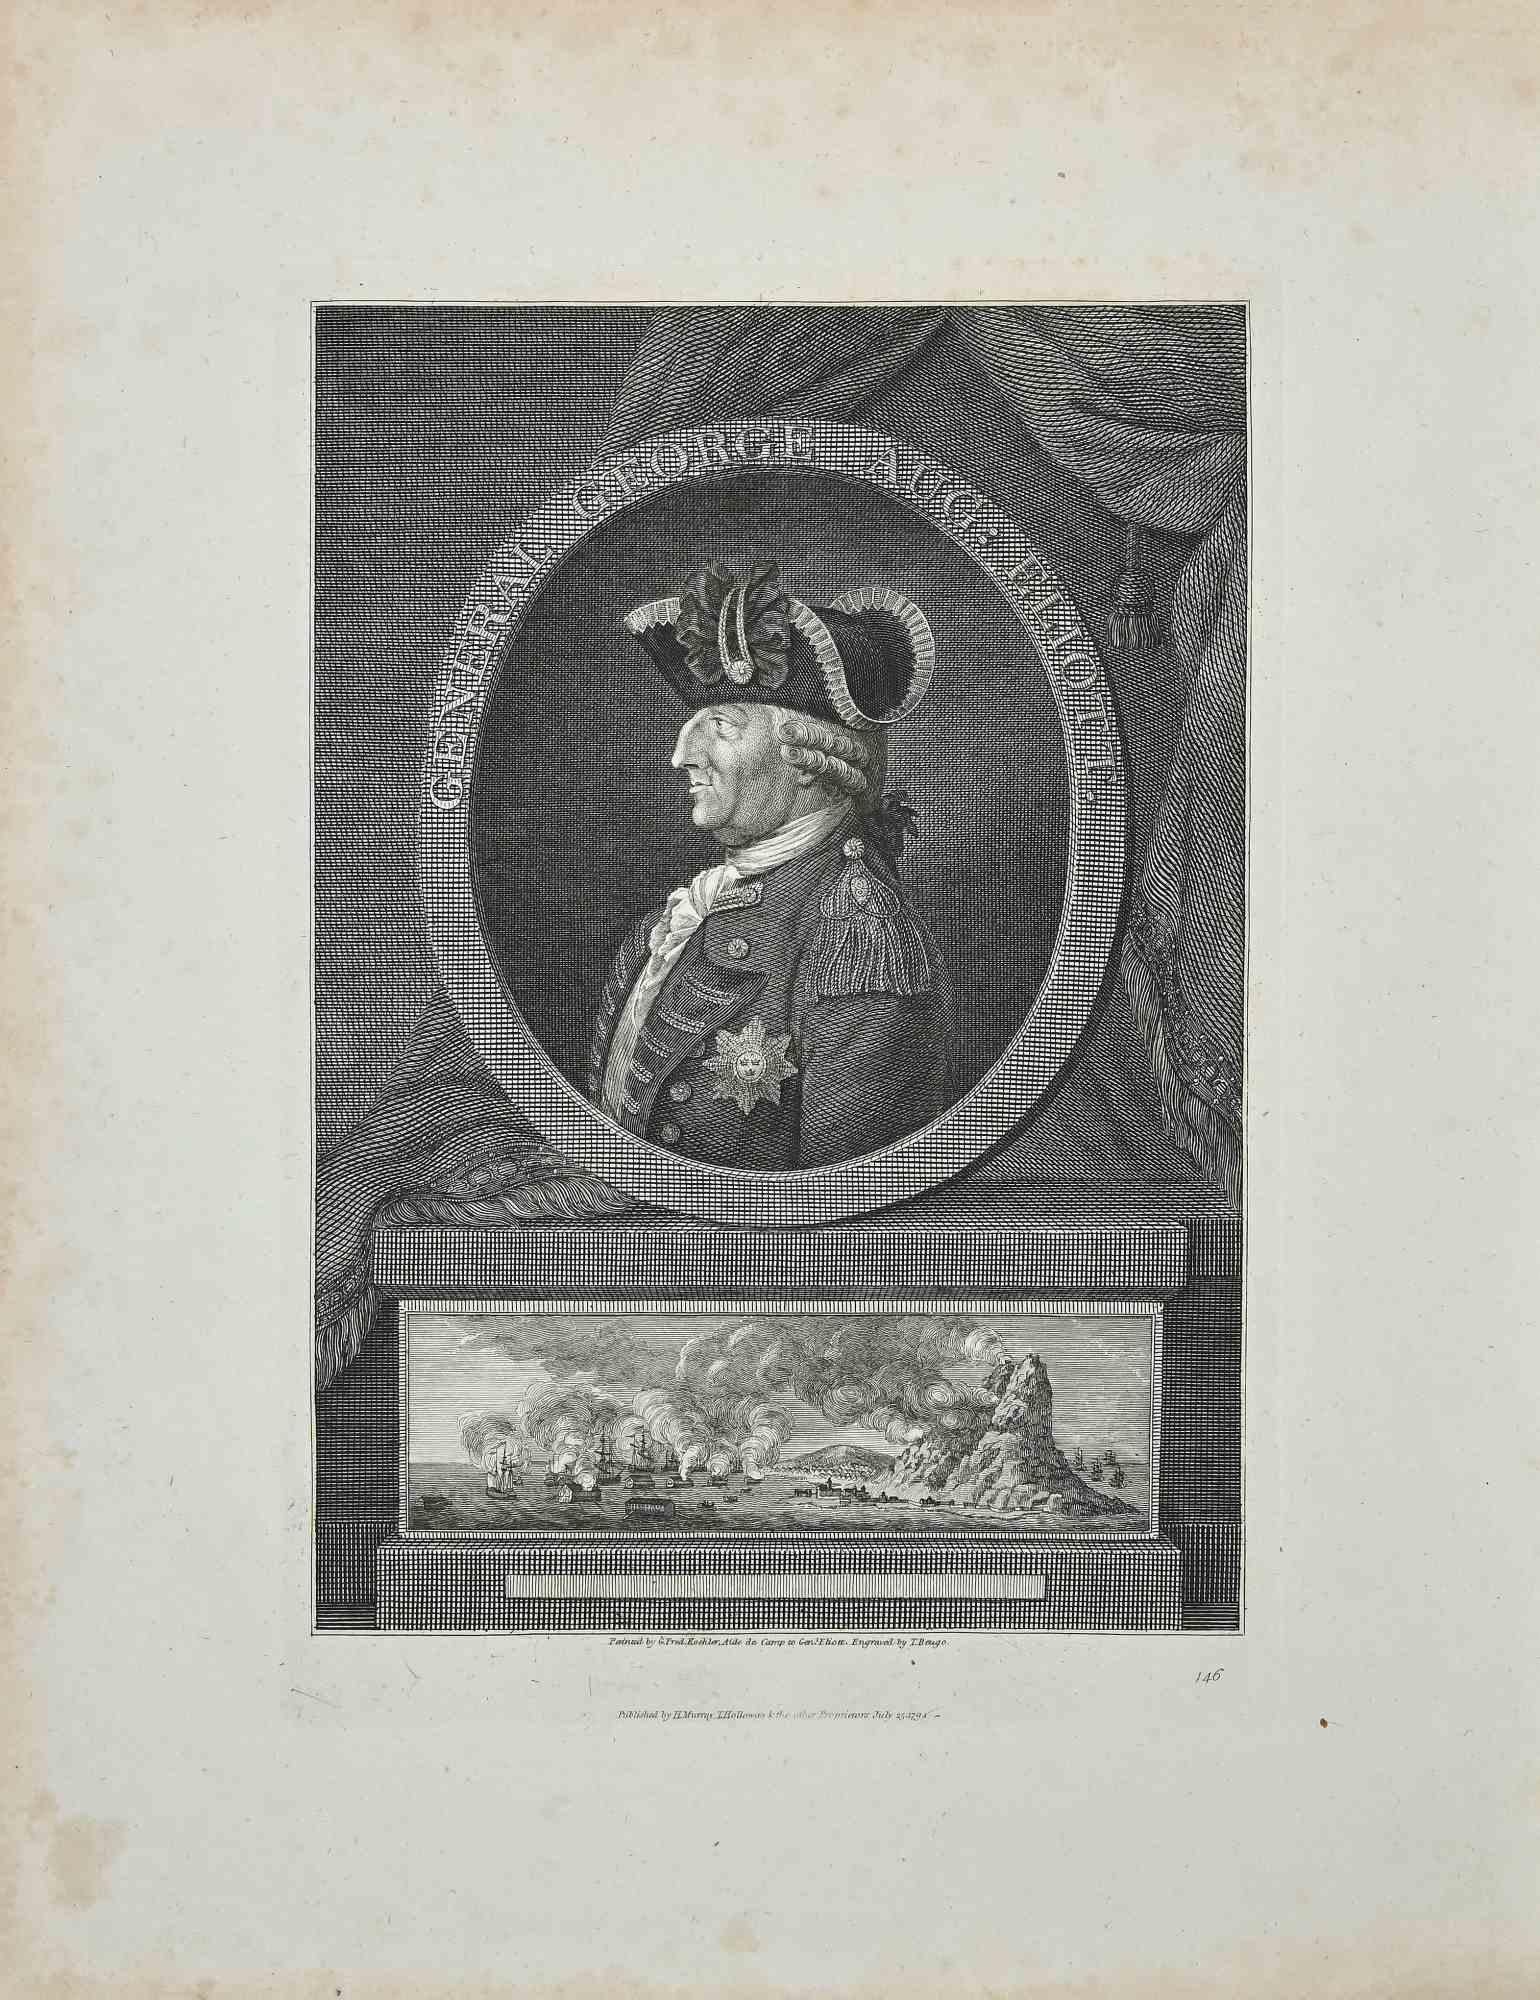 Portrait of General George Aug. Eliott is an original etching artwork realized by Thomas Holloway for Johann Caspar Lavater's "Essays on Physiognomy, Designed to Promote the Knowledge and the Love of Mankind", London, Bensley, 1810. 

Engraved by